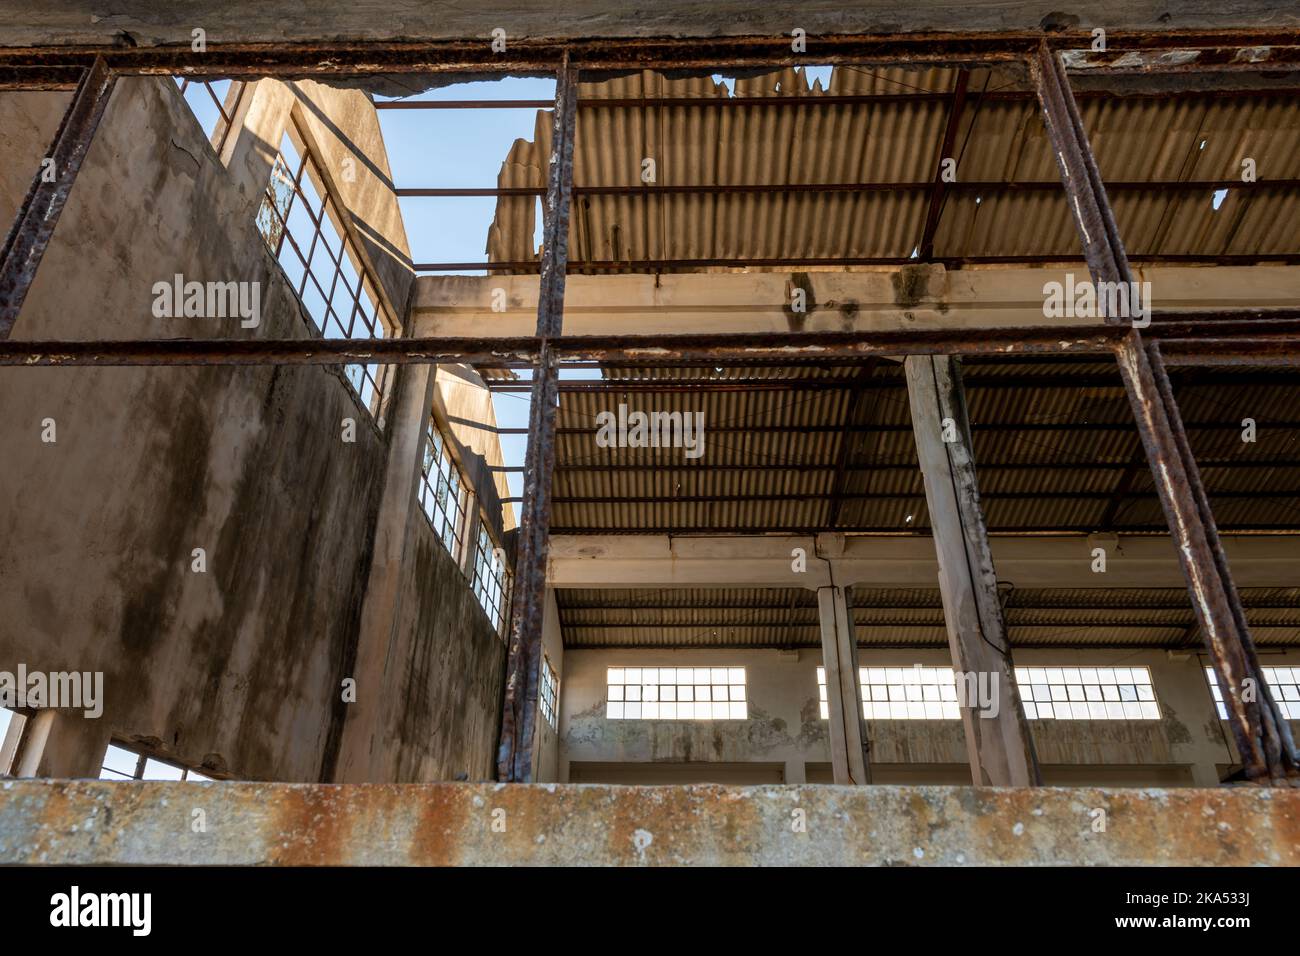 Interior view of an abandoned derelict factory building showing the broken asbestos roofing. Stock Photo